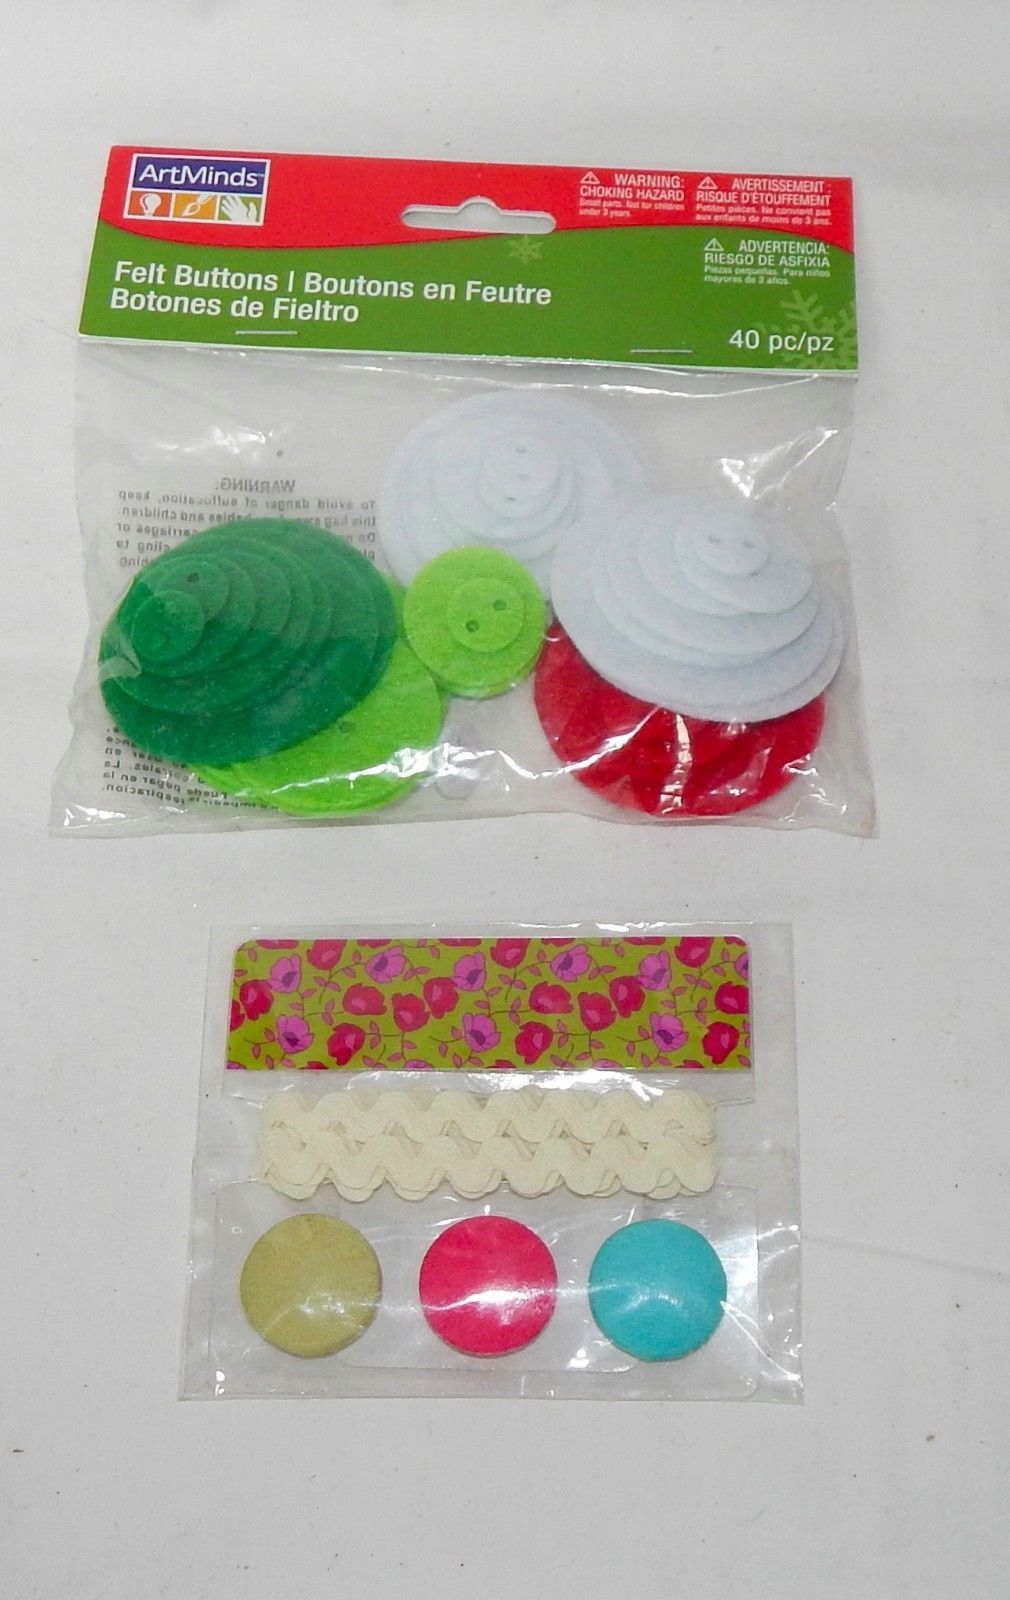  Christmas Art Minds 2" Felt Buttons 40pc & Trim and Buttons Three Color 3/4 23F - $5.91